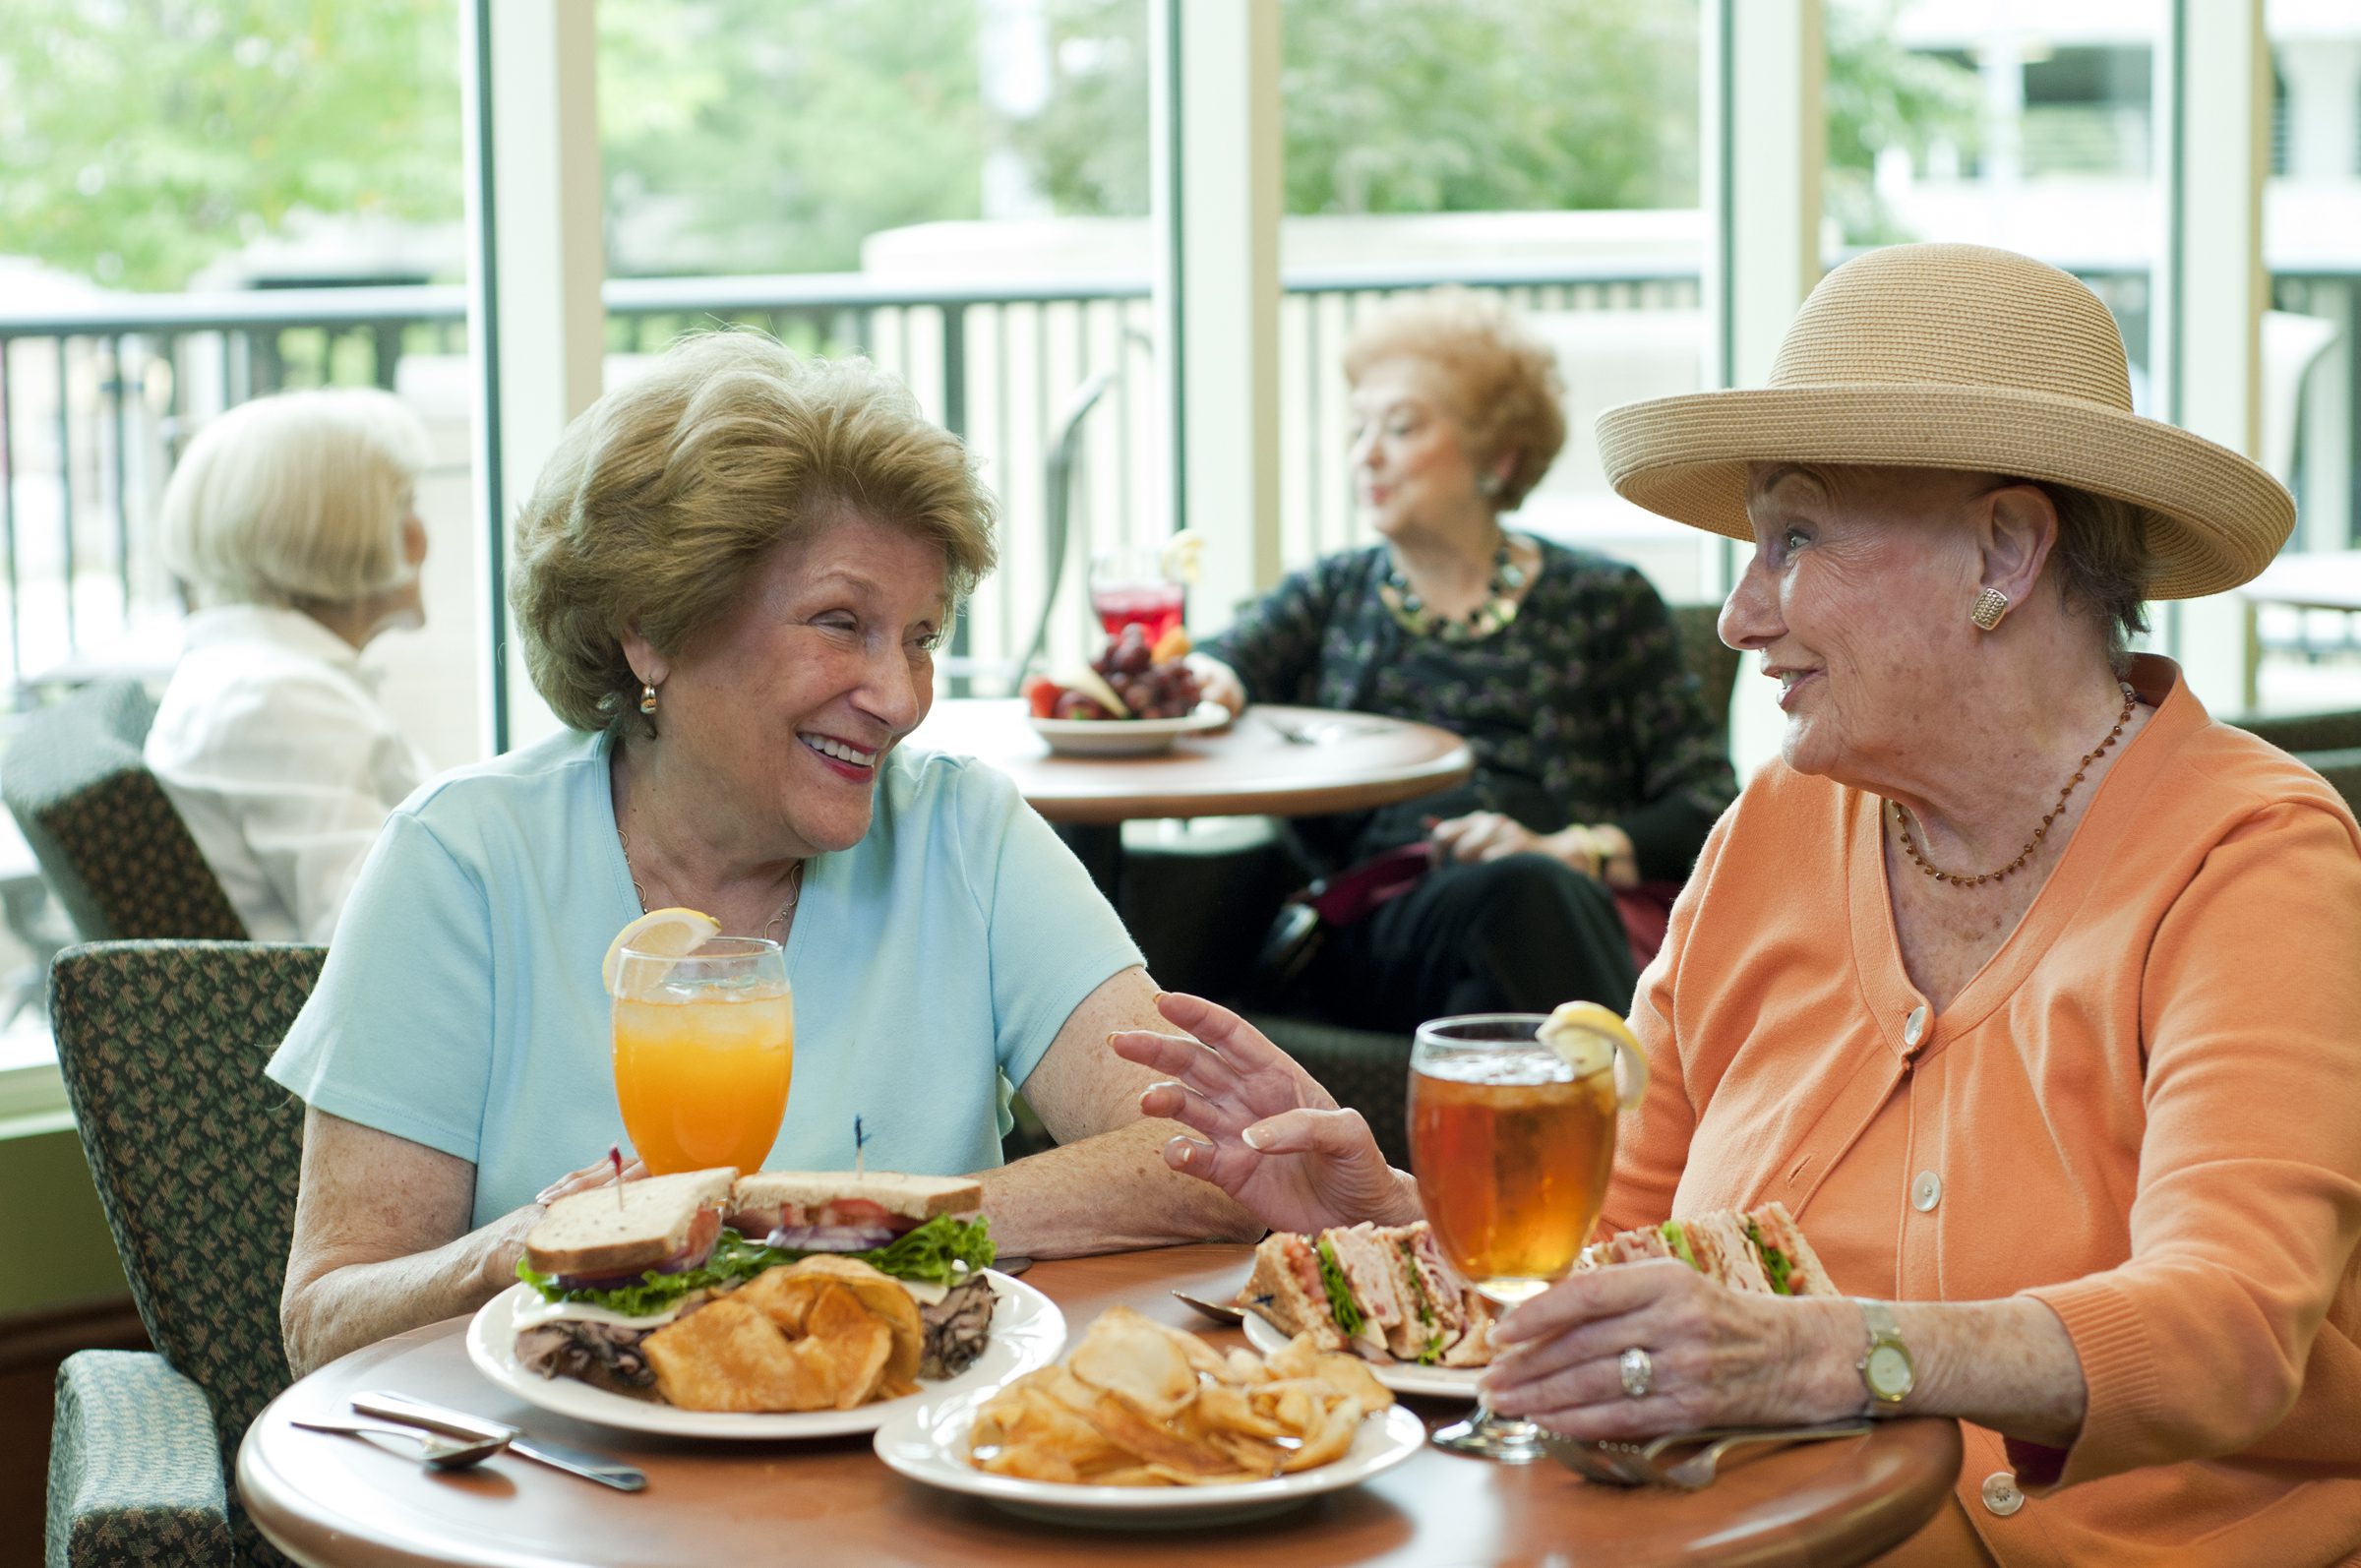 Two elderly women enjoying refreshments and a meal while seated at a table.